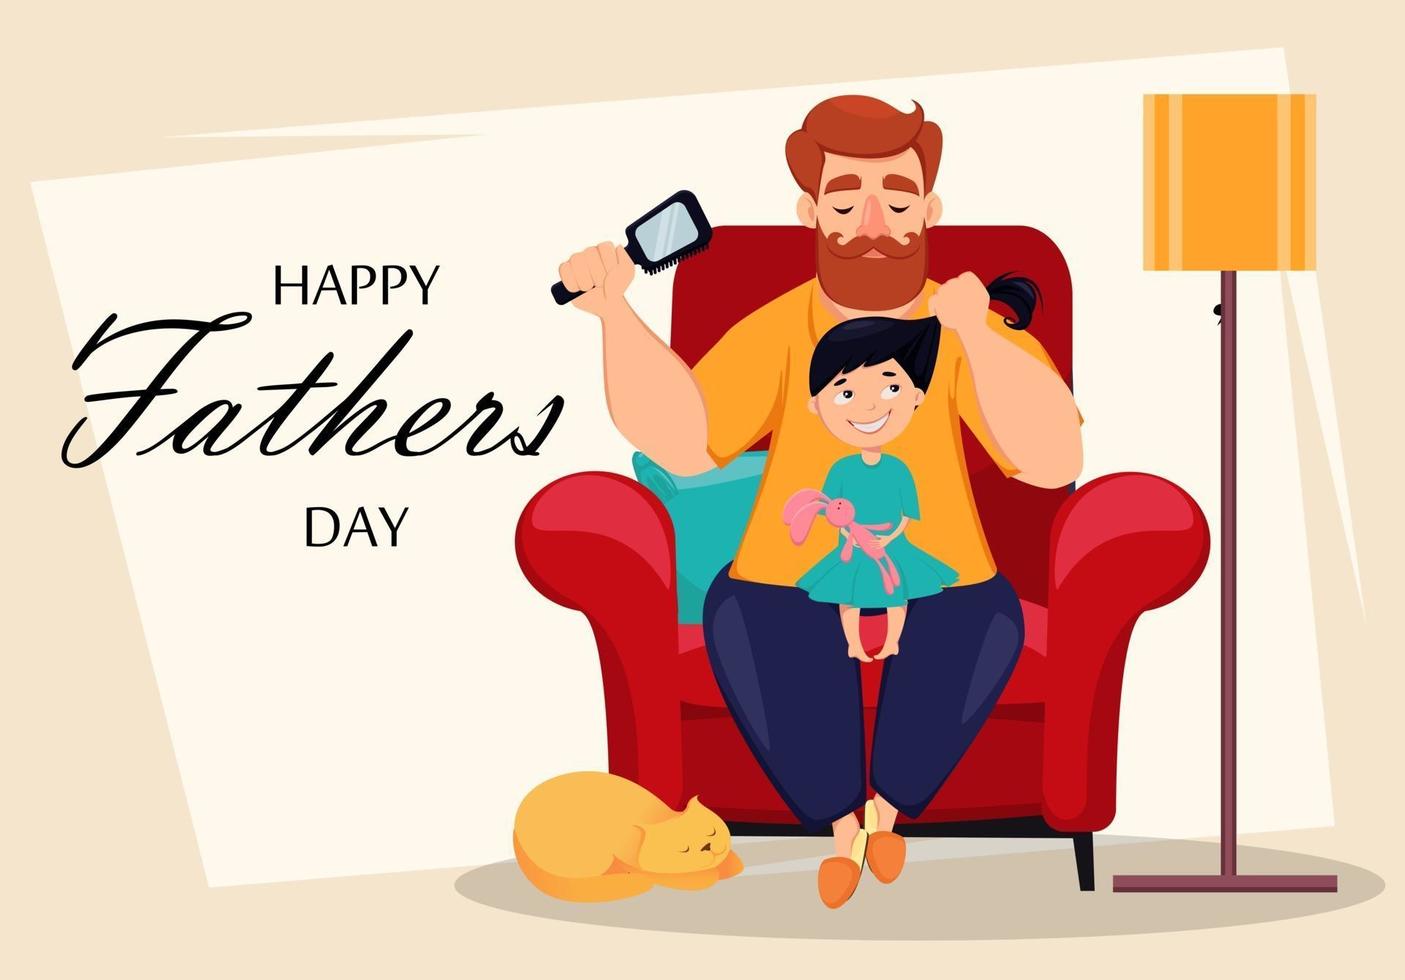 Happy Fathers Day greeting card vector